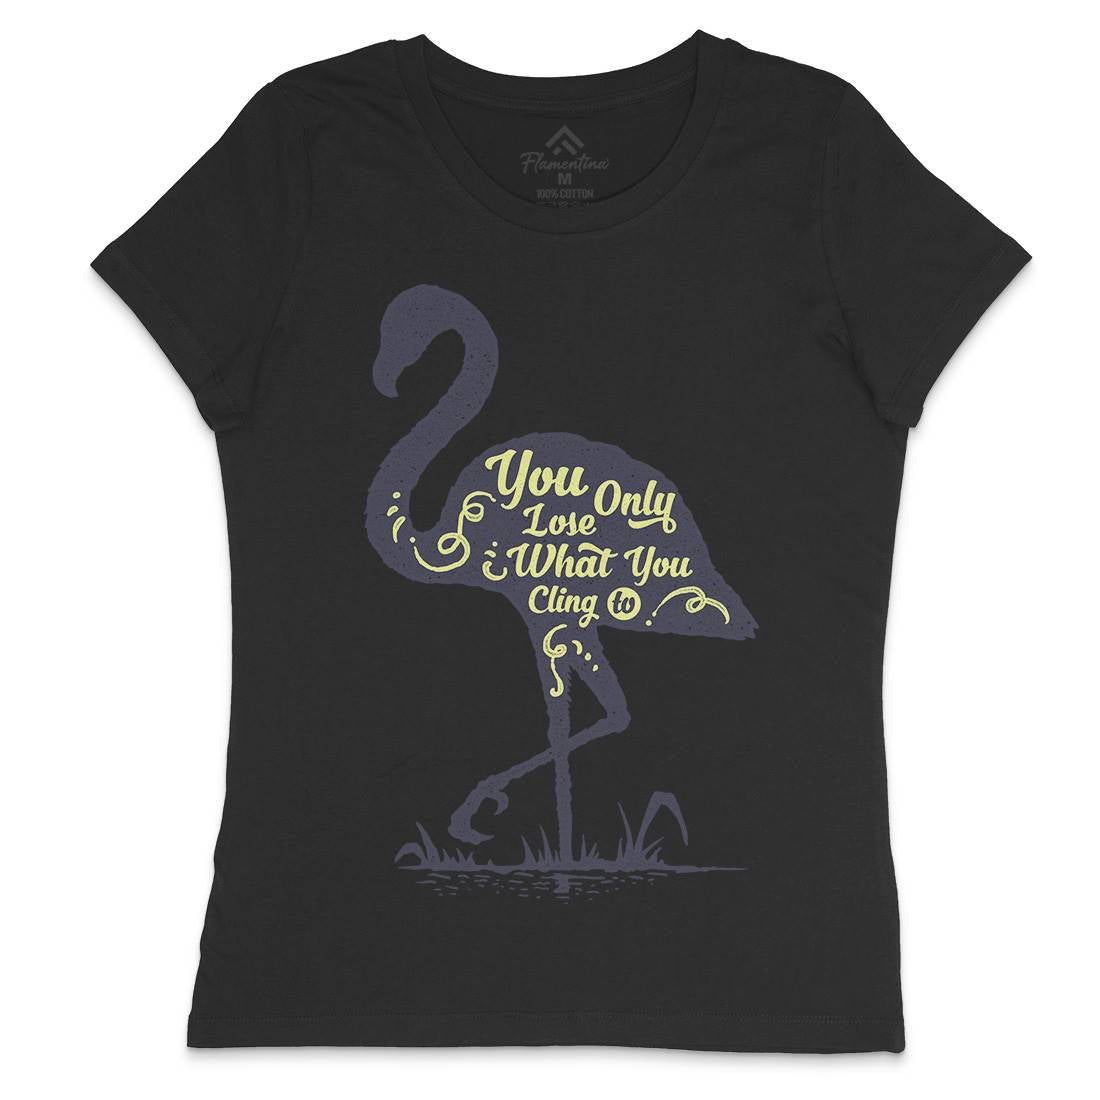 You Only Lose Womens Crew Neck T-Shirt Quotes A395